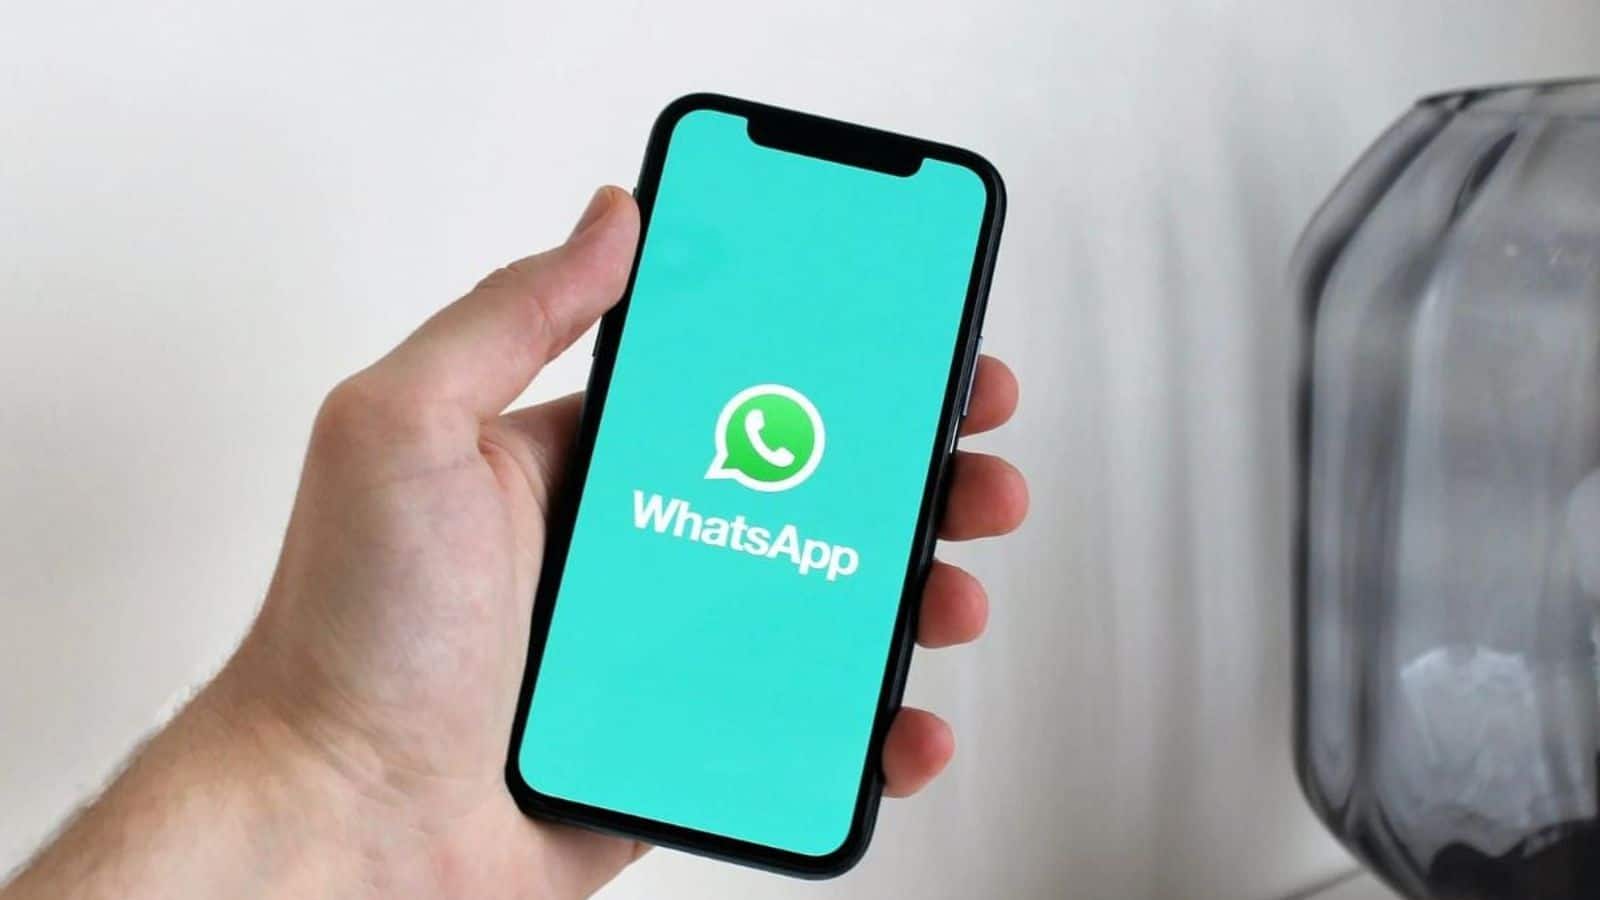 WhatsApp working on customizable chat themes and accent colors